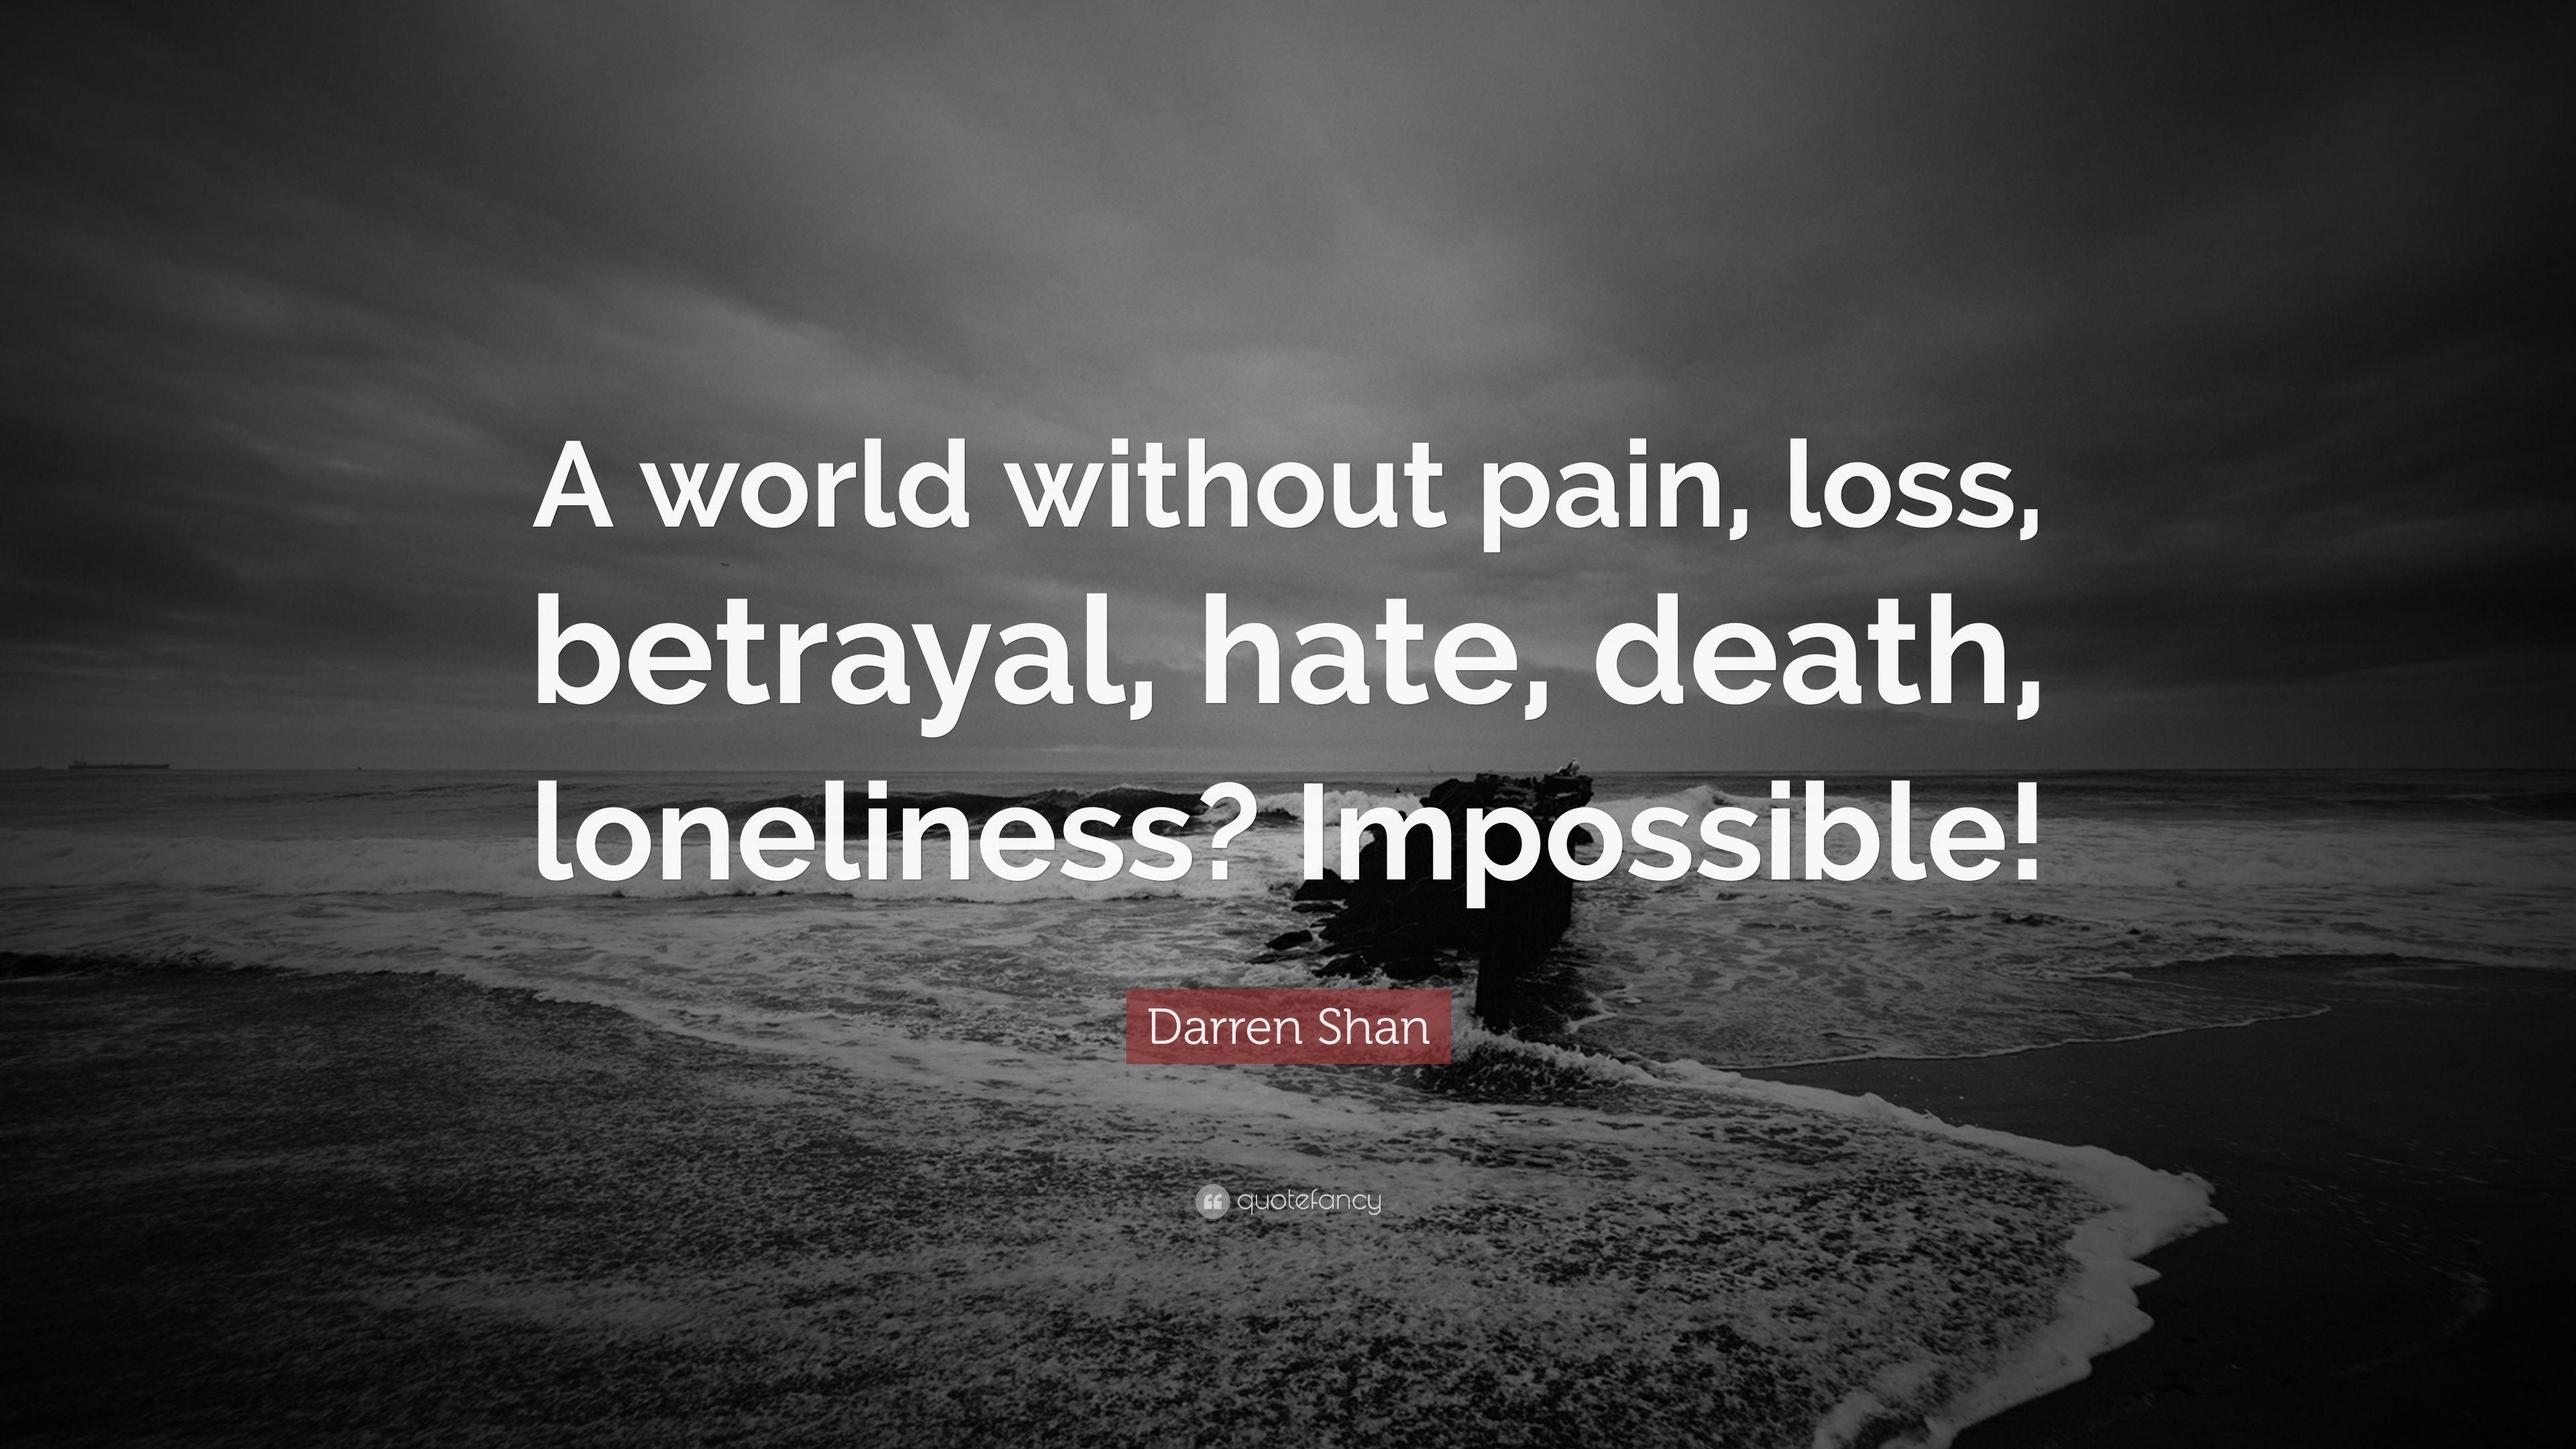 Darren Shan Quote: “A world without pain, loss, betrayal, hate